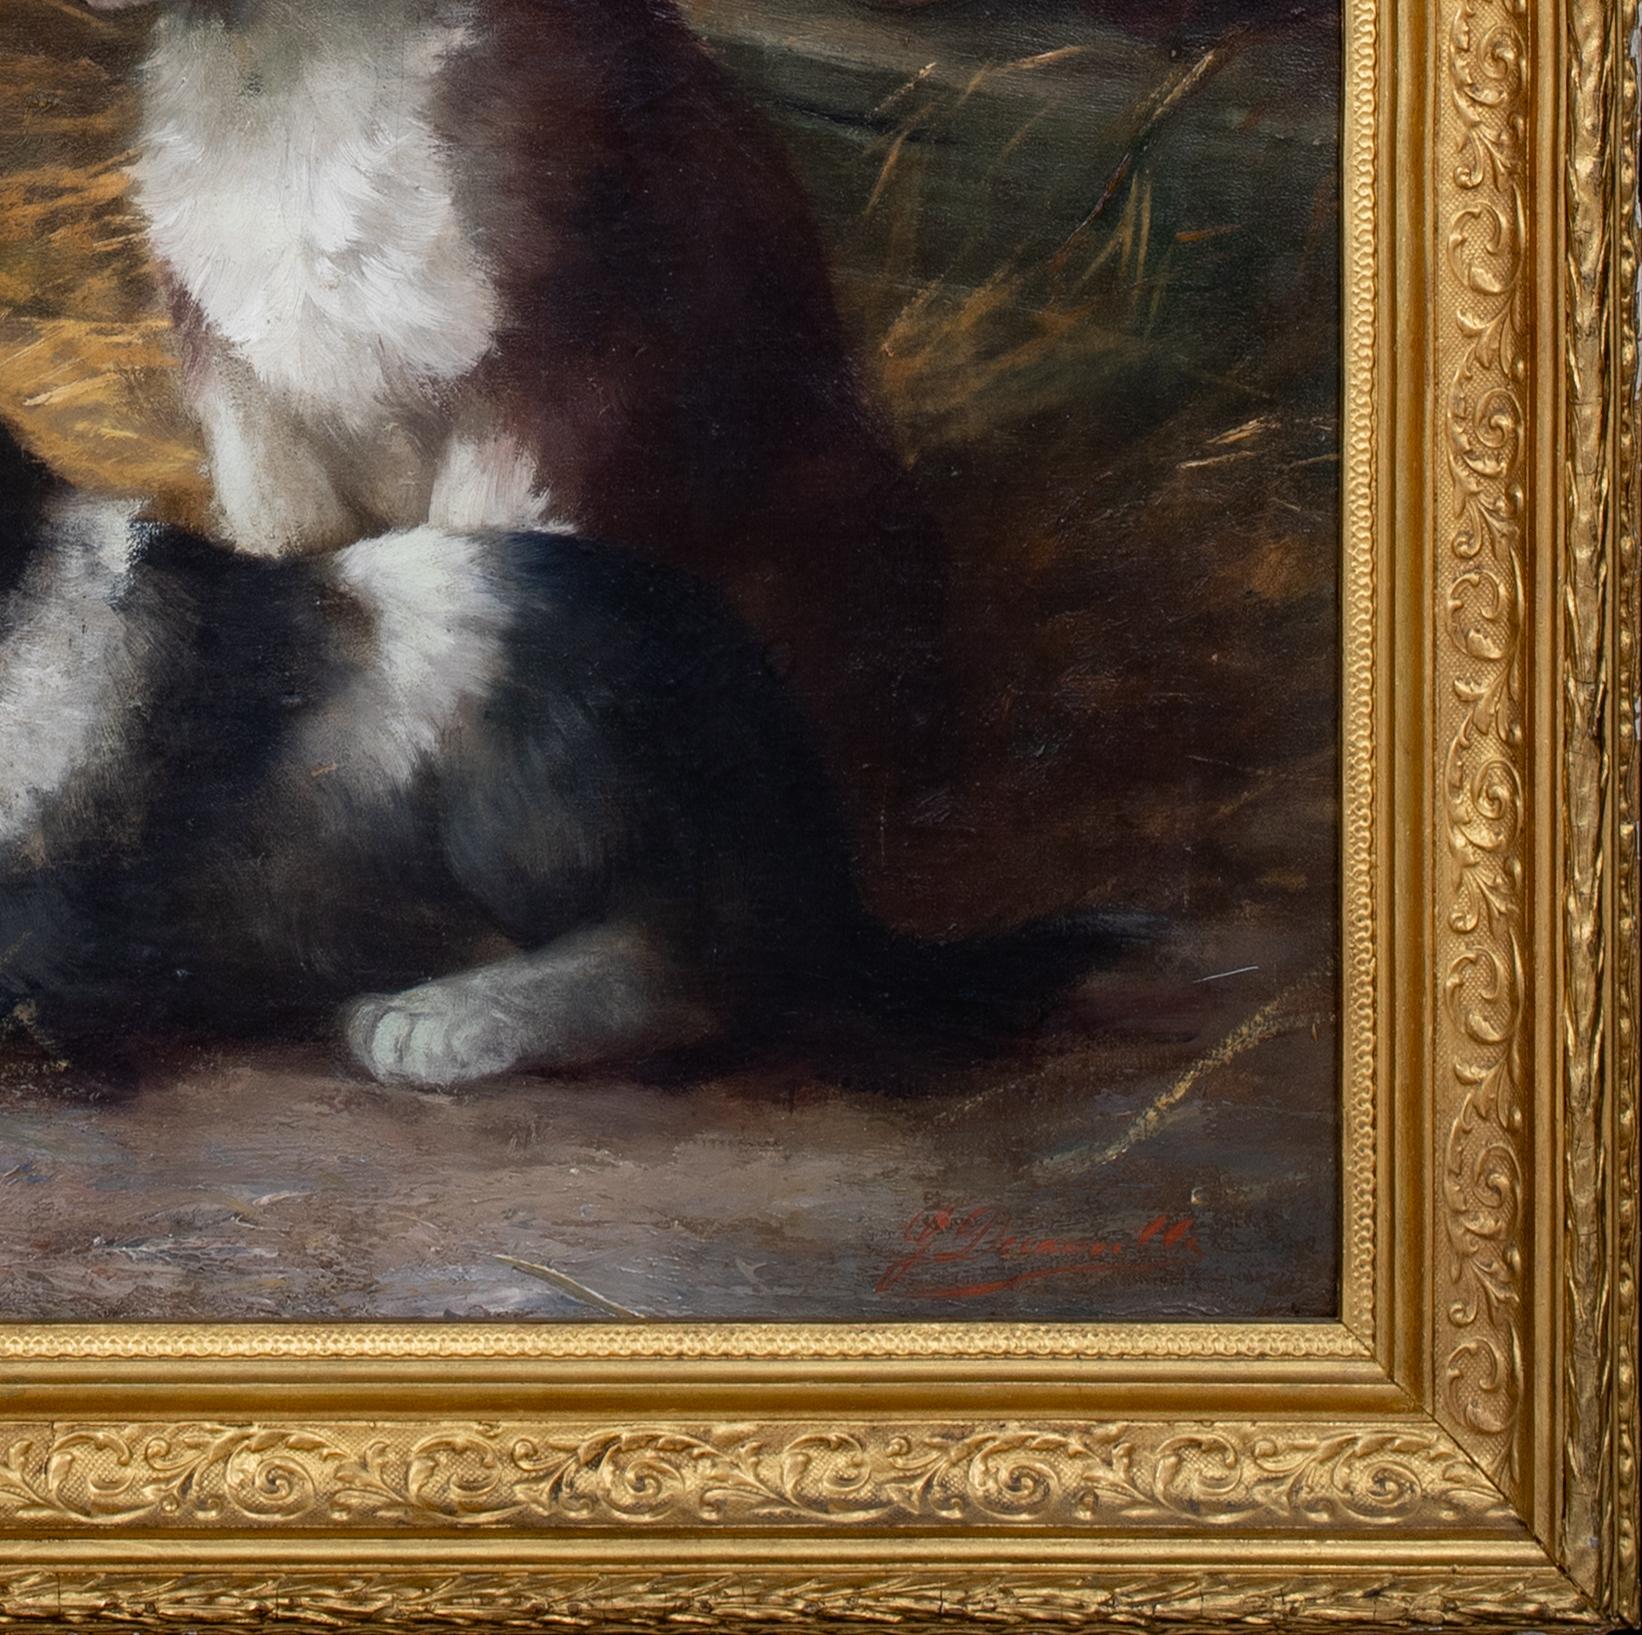 French Spaniel Puppies In A Barn, 19th Century

French School - by G De Cauville

Large 19th Century French barn/stable interior of French Spaniel puppies, oil on canvas. Excellent quality and condition, signed and presented in a good gilt